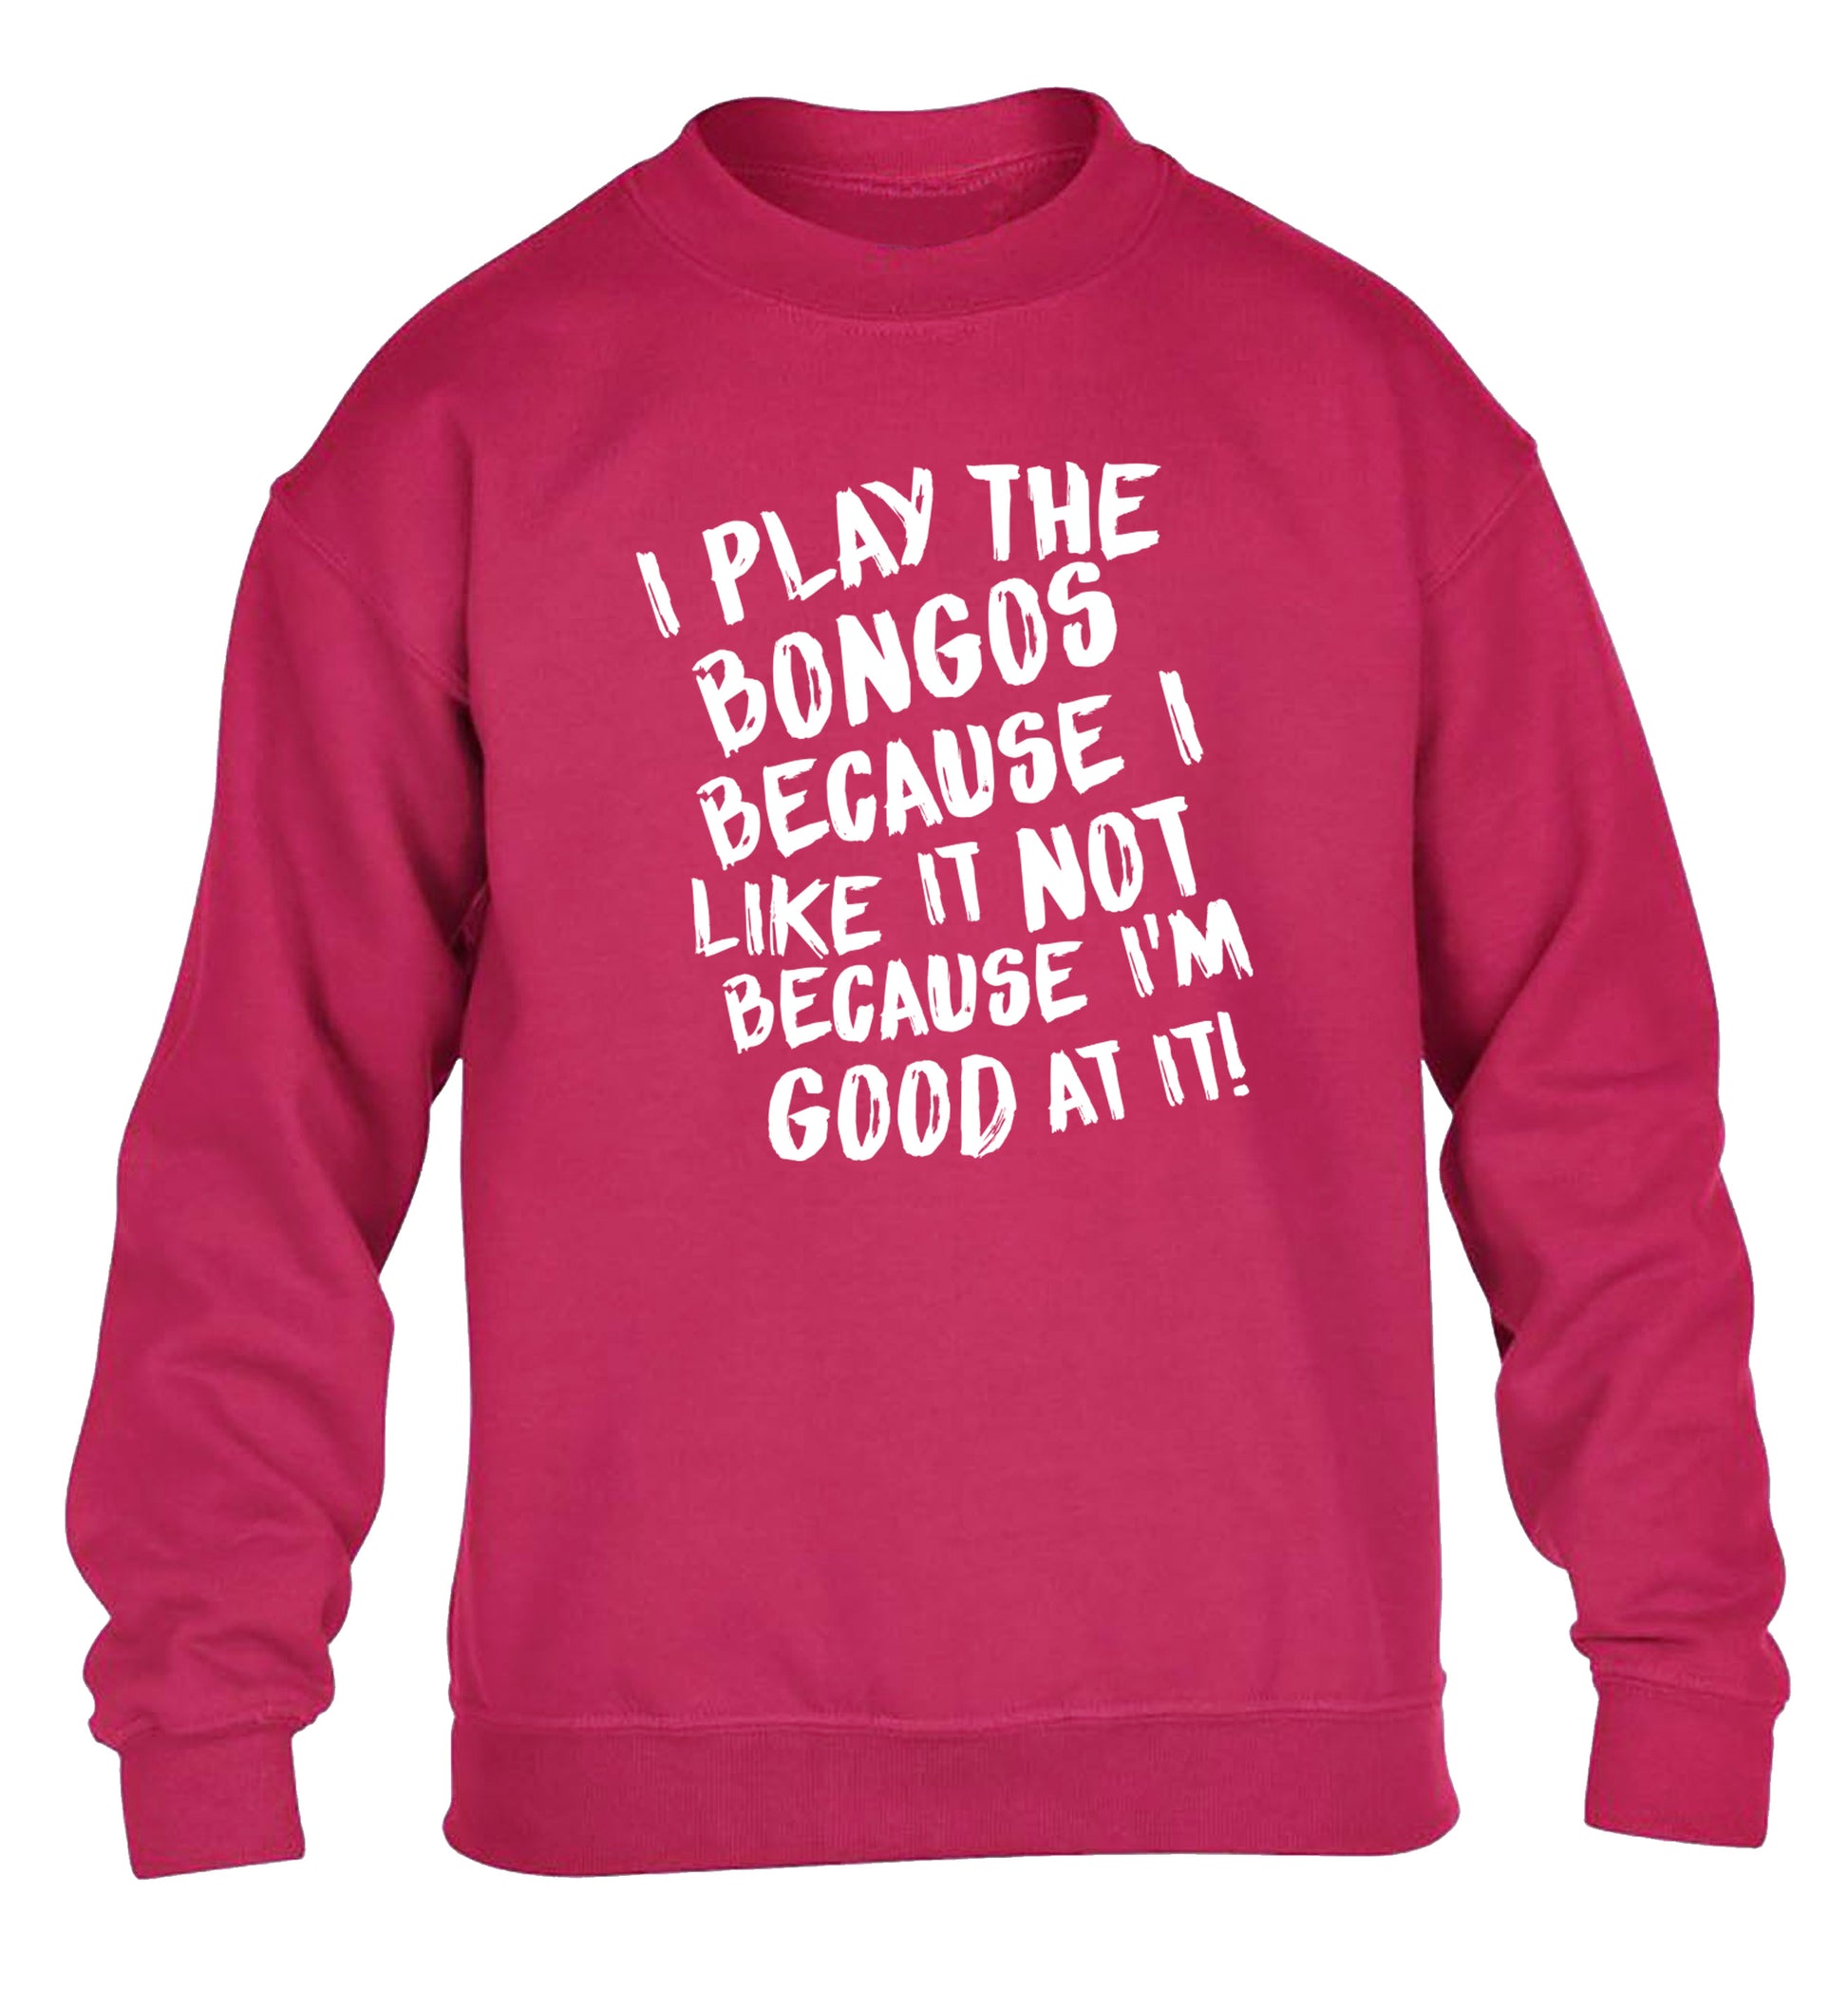 I play the bongos because I like it not because I'm good at it children's pink sweater 12-14 Years